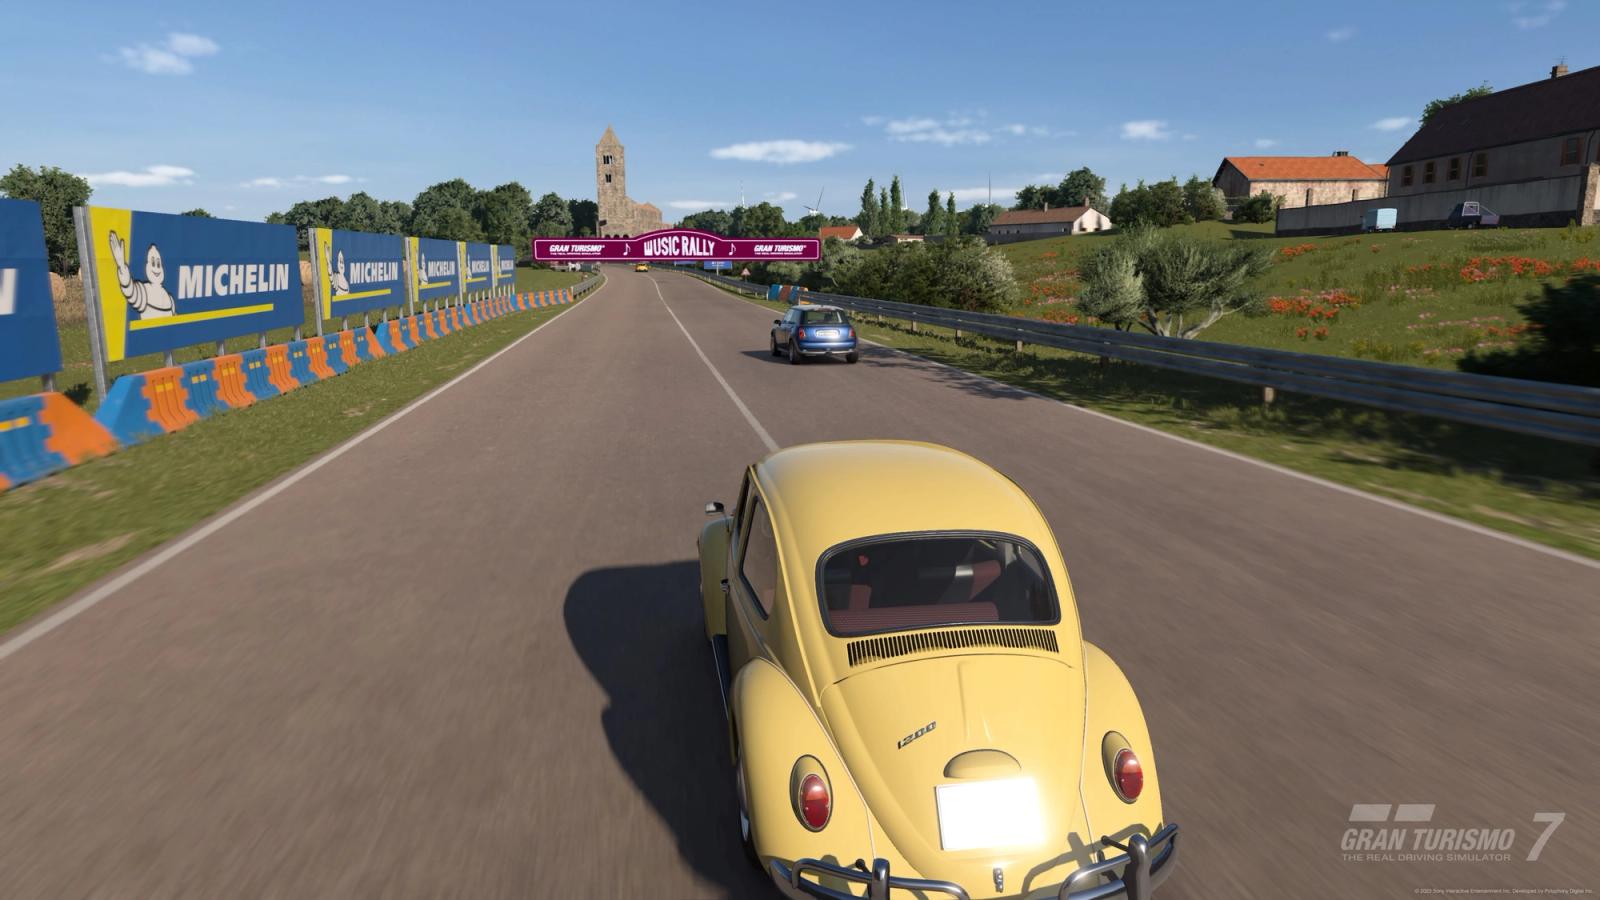 The VW Beetle participating in a Music Rally in Gran Turismo 7